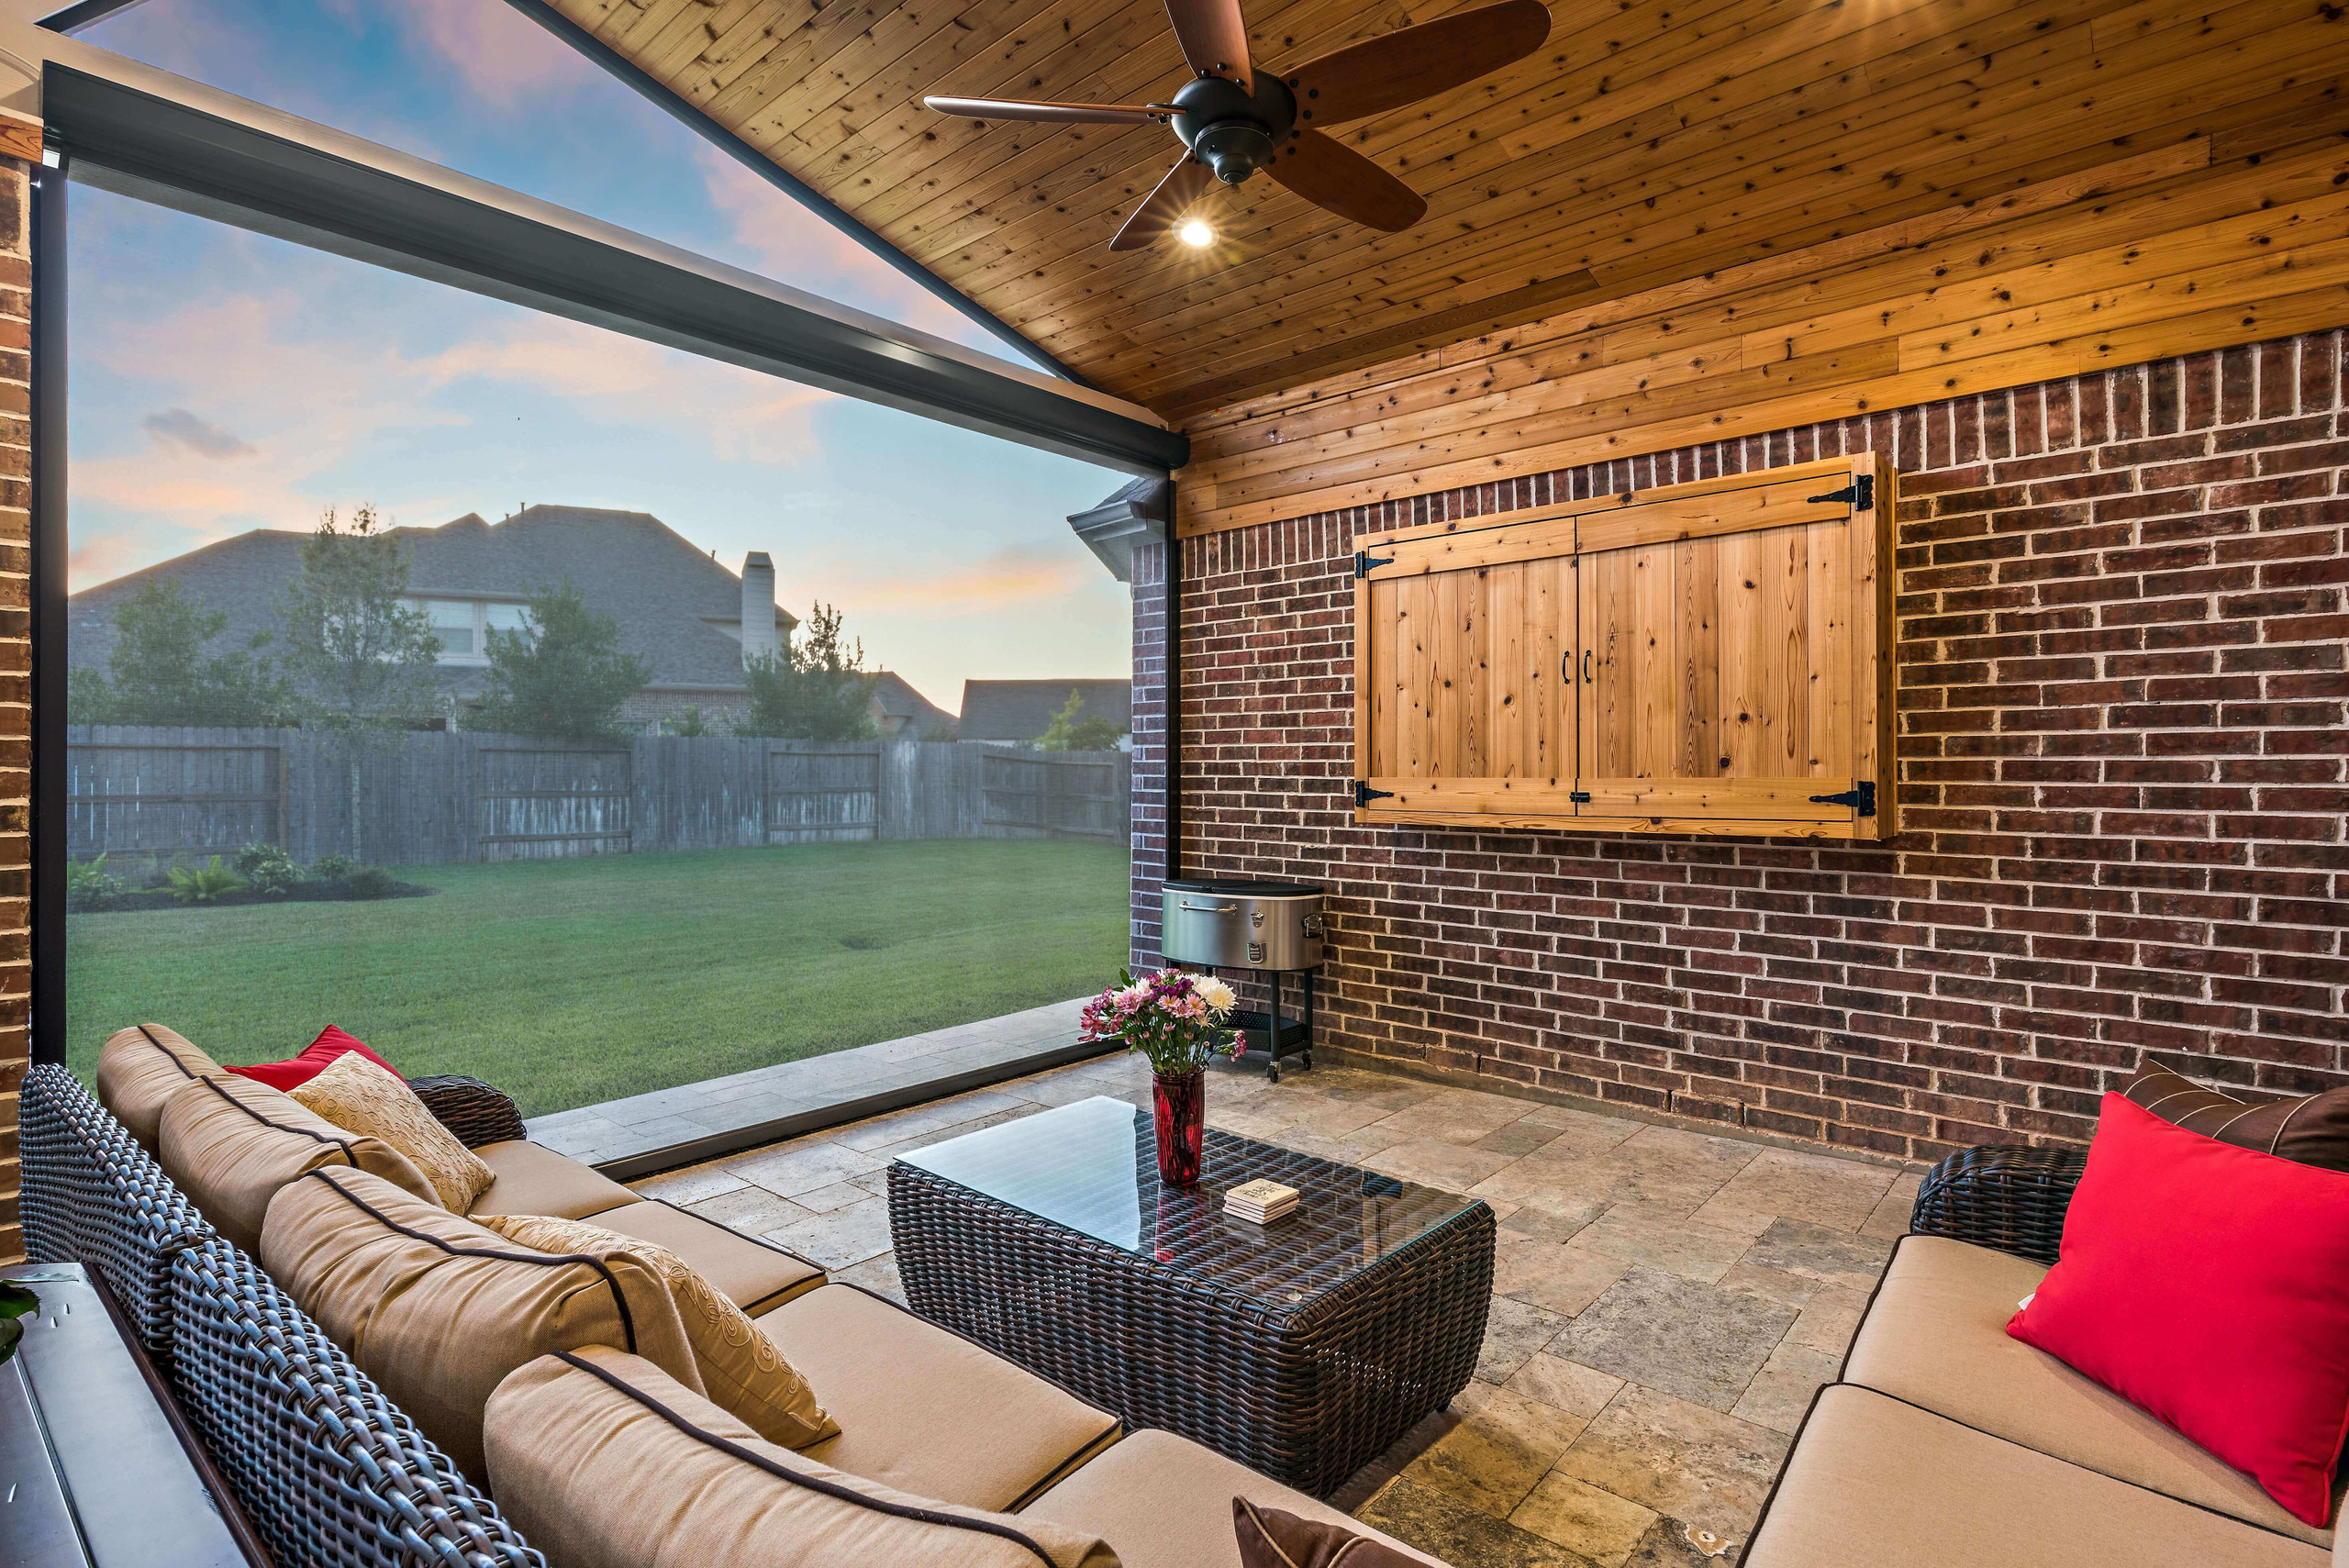 Covered patio extension with screens, fan and tv mount for backyard entertaining.